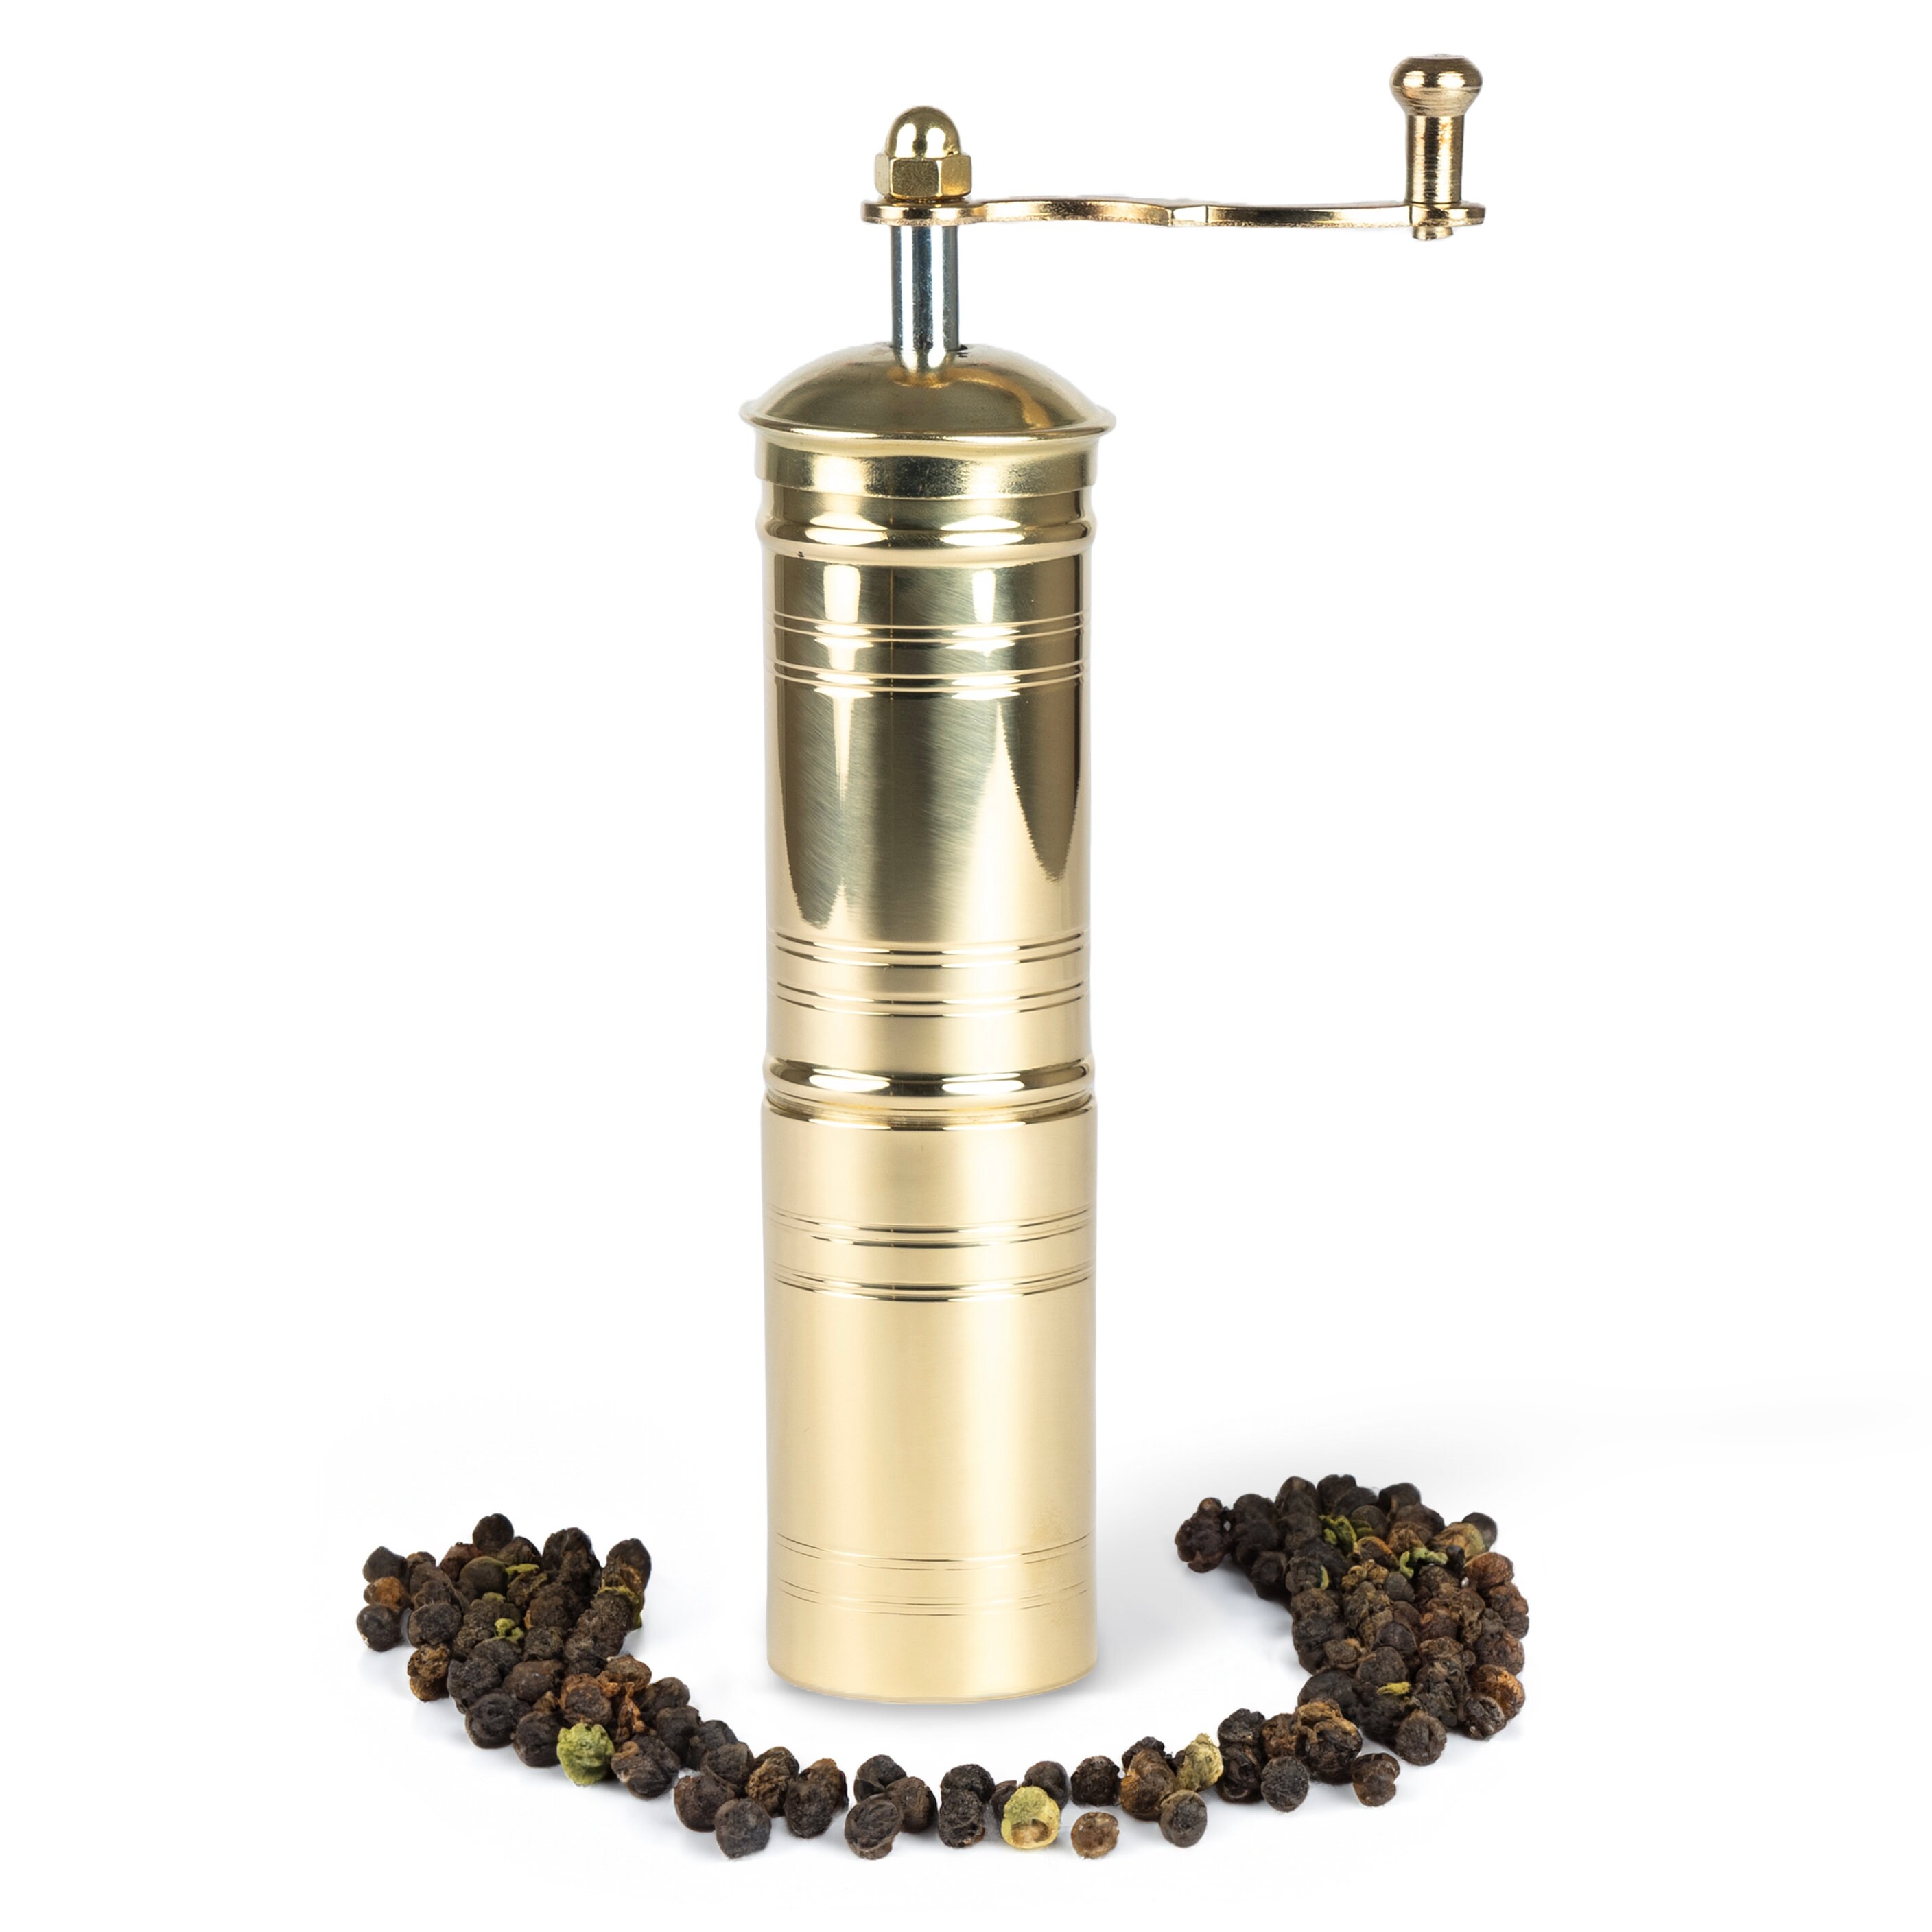 Turkish Coffee Grinder: Our 6 Top Picks To Choose From